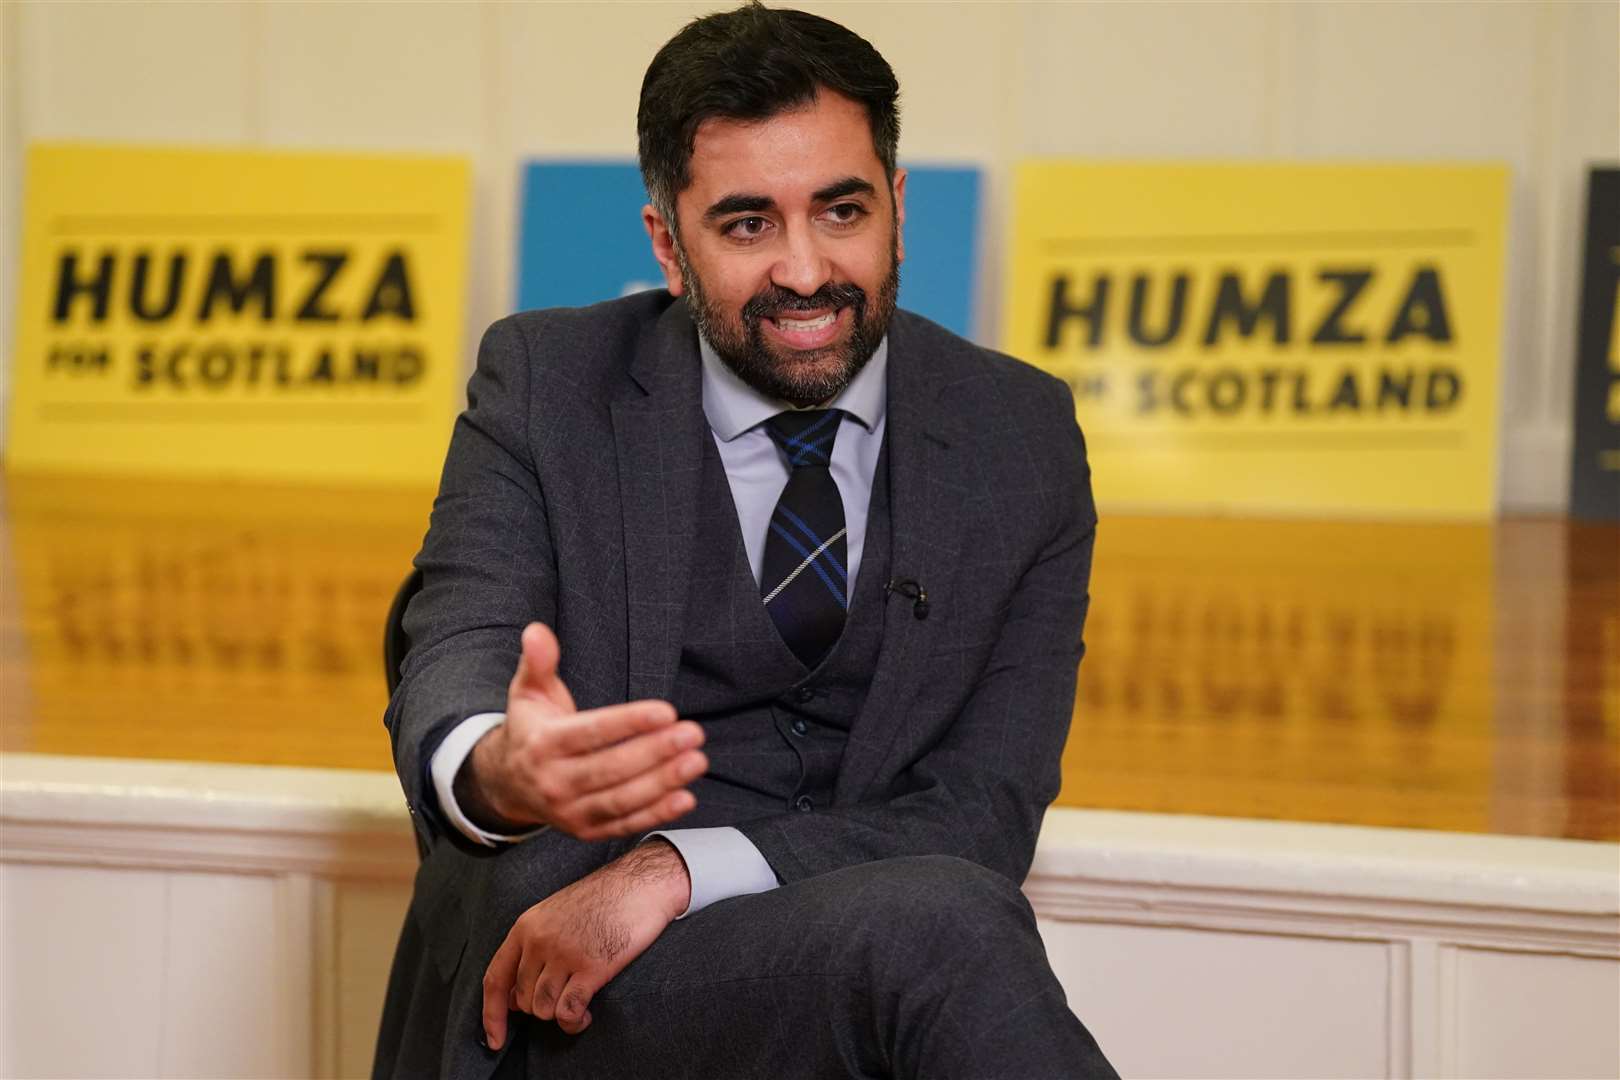 Health Secretary Humza Yousaf is bidding to become First Minister (Andrew Milligan/PA)